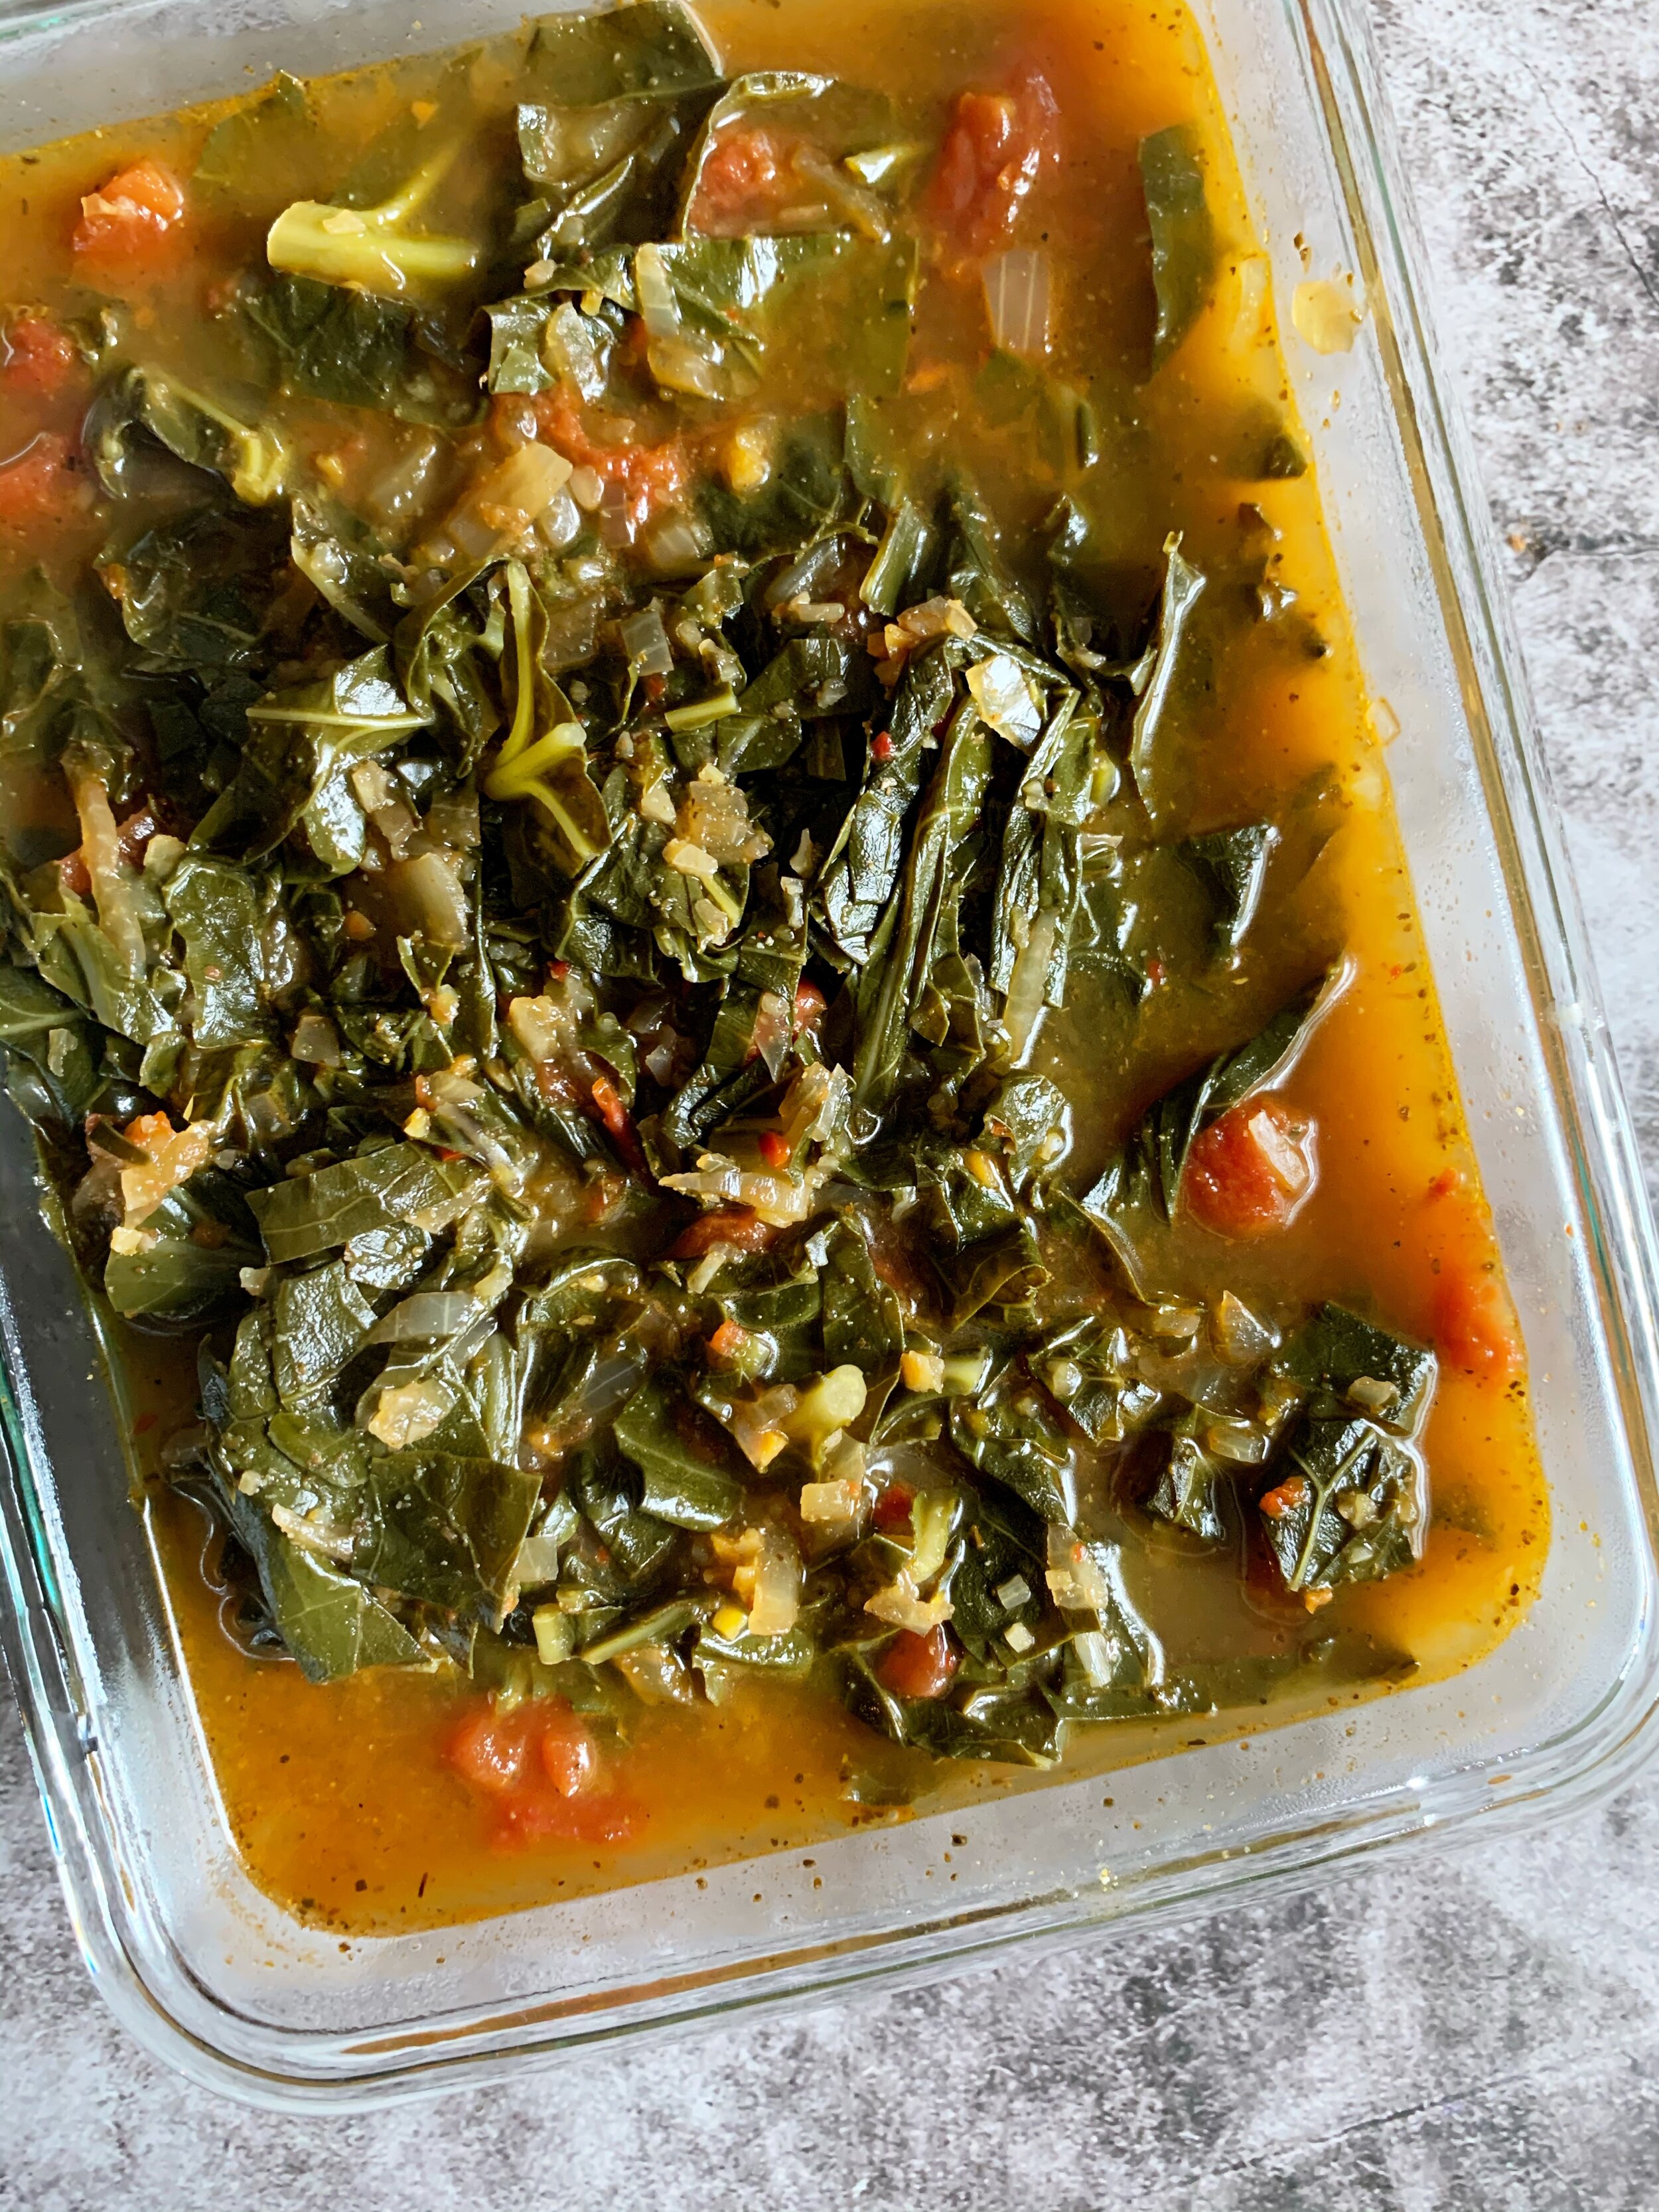 How to Cook Collard Greens